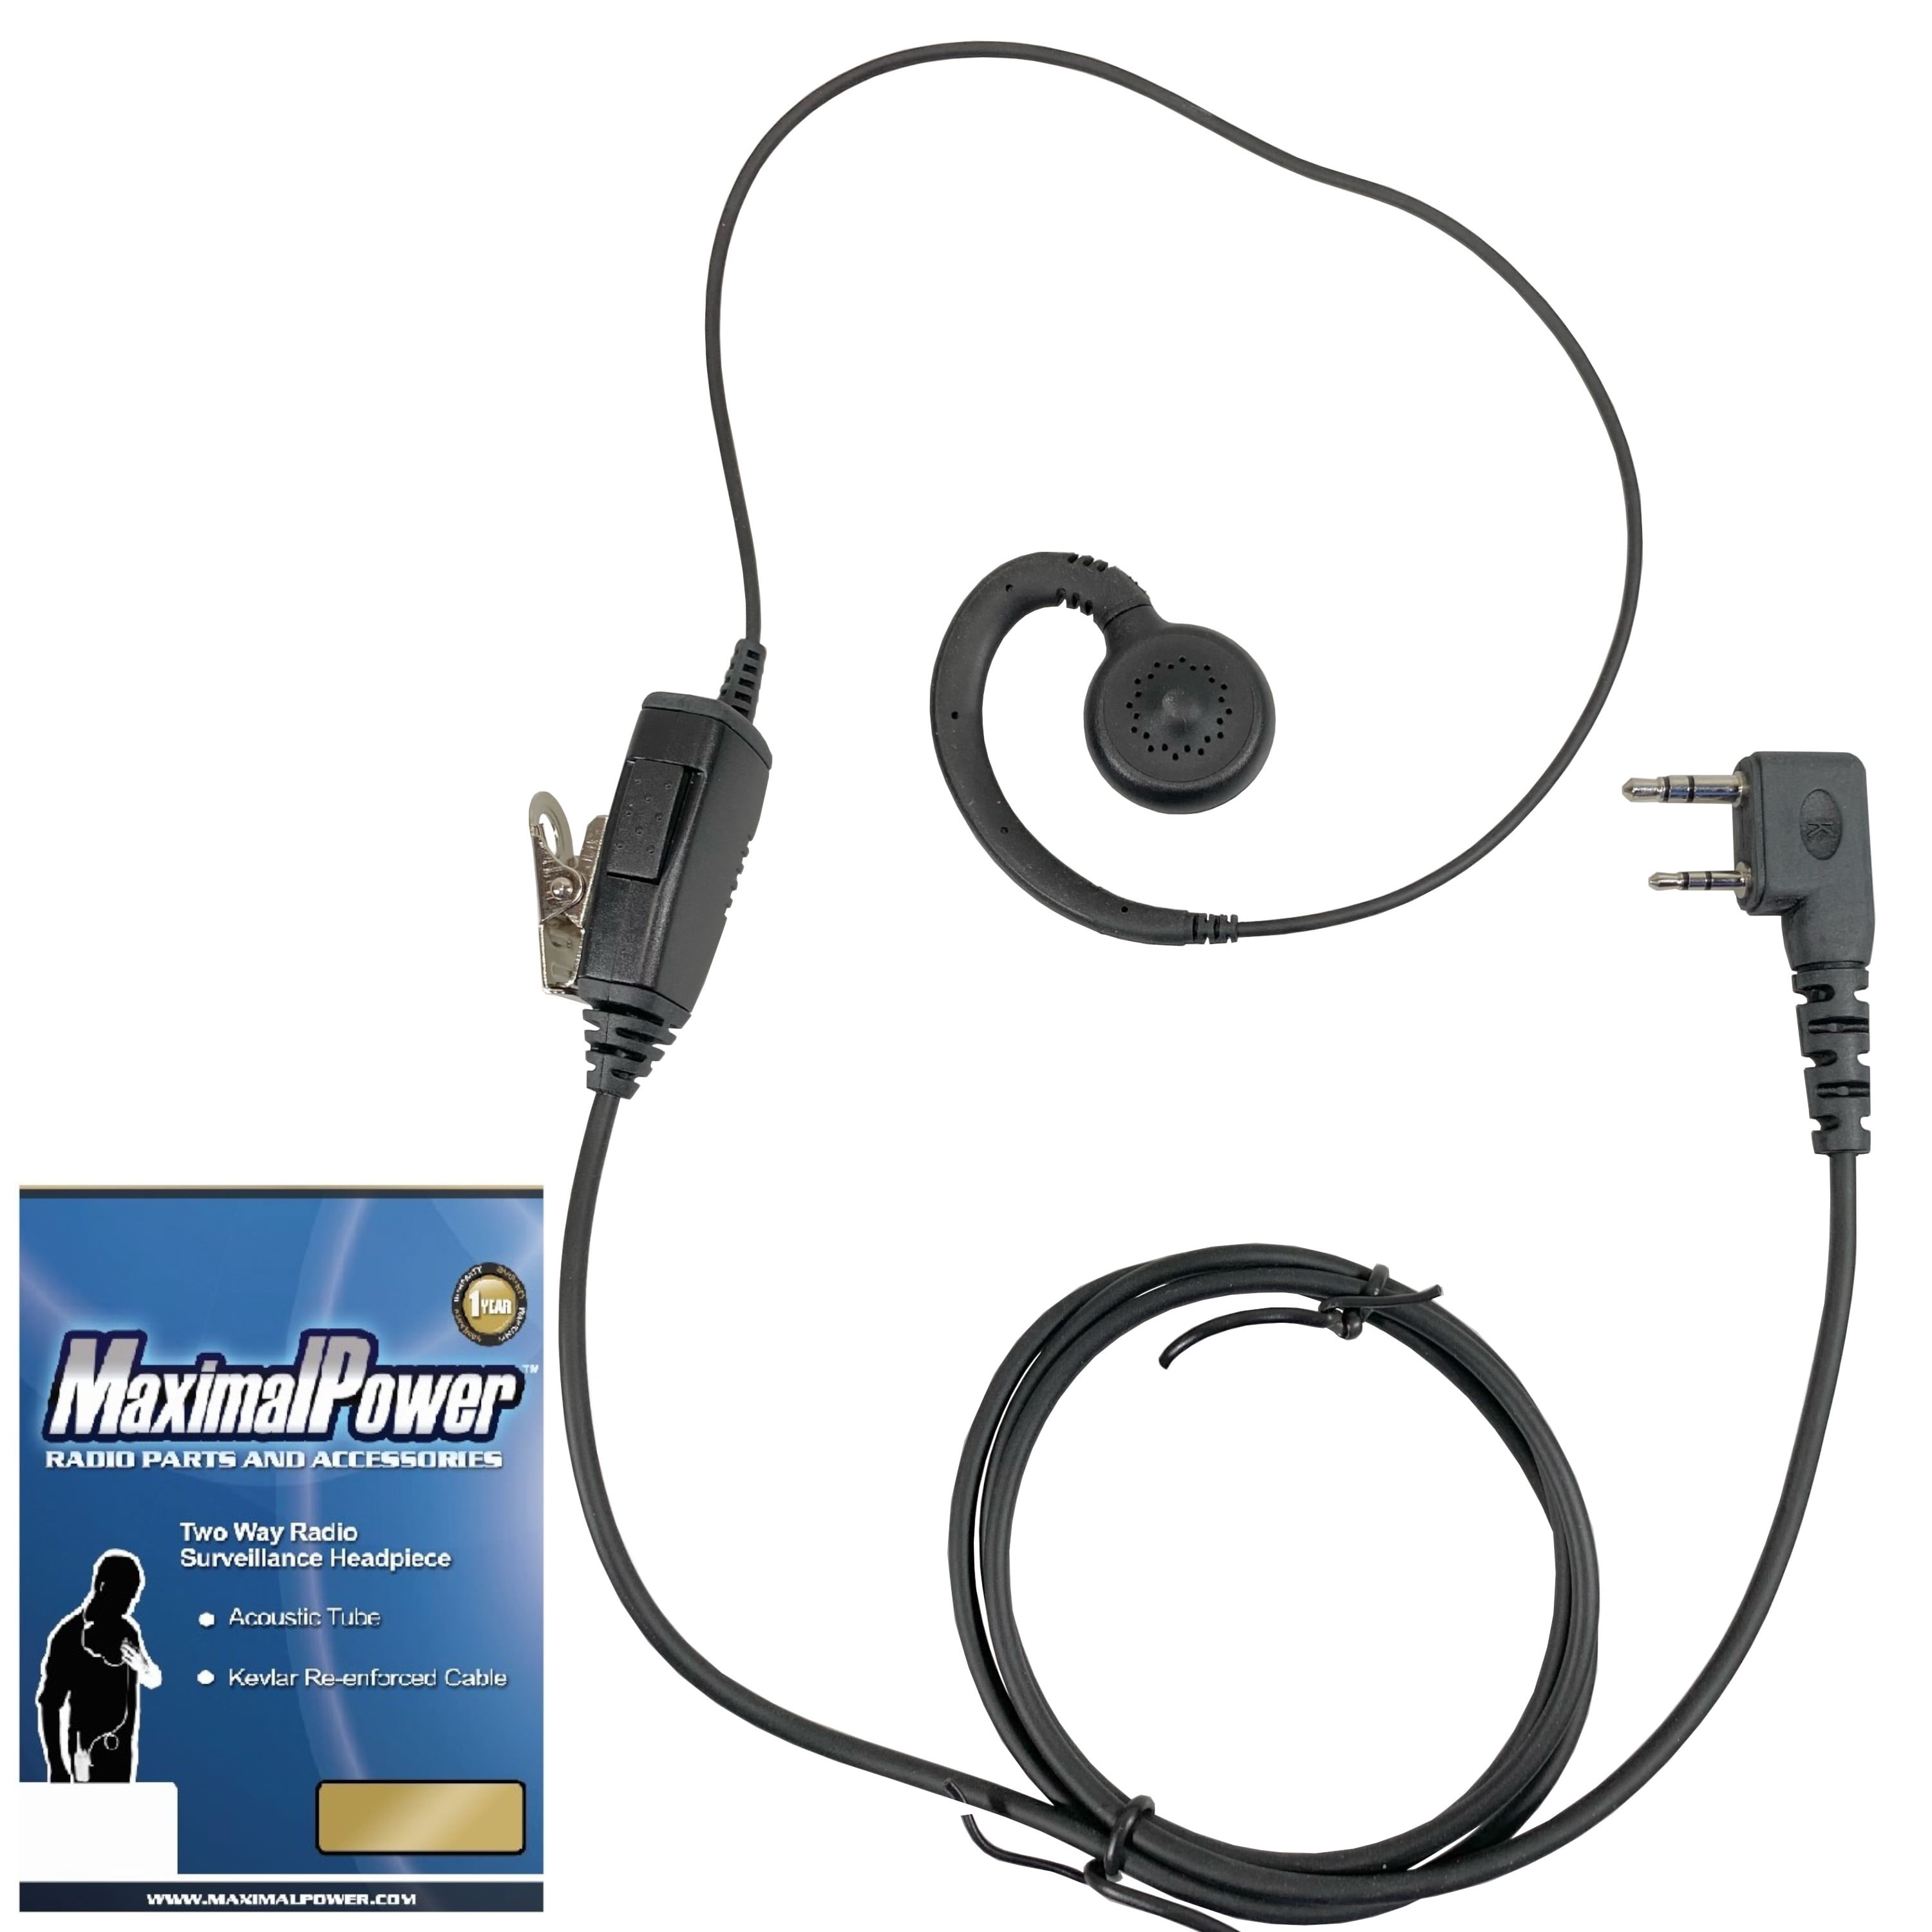 NAGOYA Wire Coil Earbud Audio Mic Surveillance Kit with Two Way Radio Headsets Earpiece PTT MIC for Hytera Walkie Talkie PD780 780G 700 700G PT580 580H QUANZHOU TRUEST COMMUNICATION CO LTD NAGOYA-PD780-60